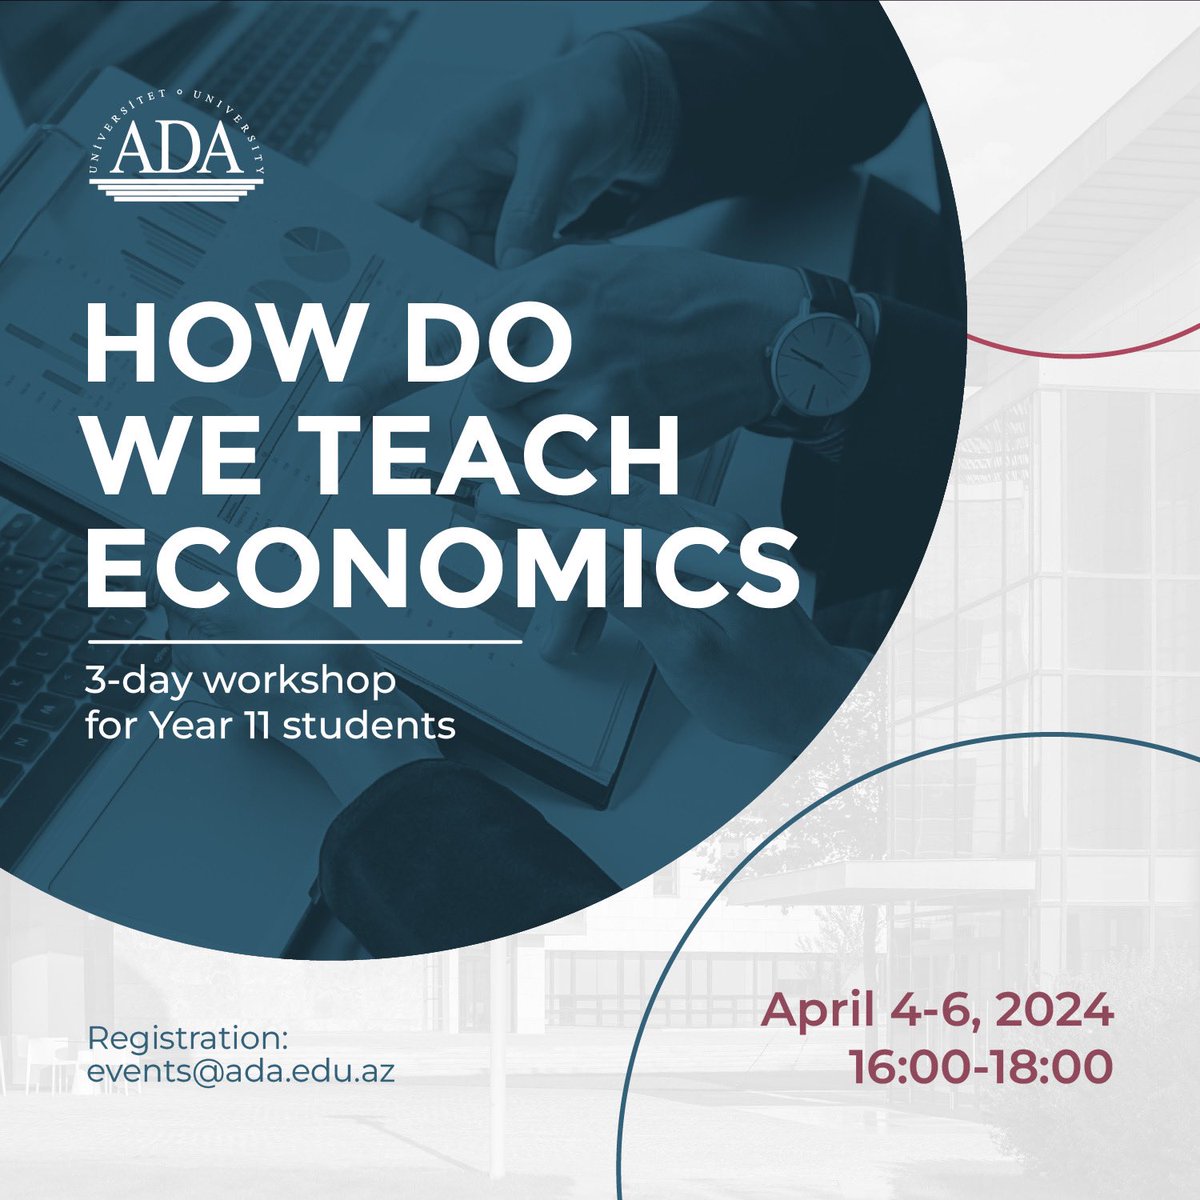 Want to know how we teach economics at ADA University? Then attend our 3-day workshop organized for Year 11 students with a keen interest in Economics and Finance! Do not miss the opportunity to learn engaging topics from our faculty and receive the certificates.